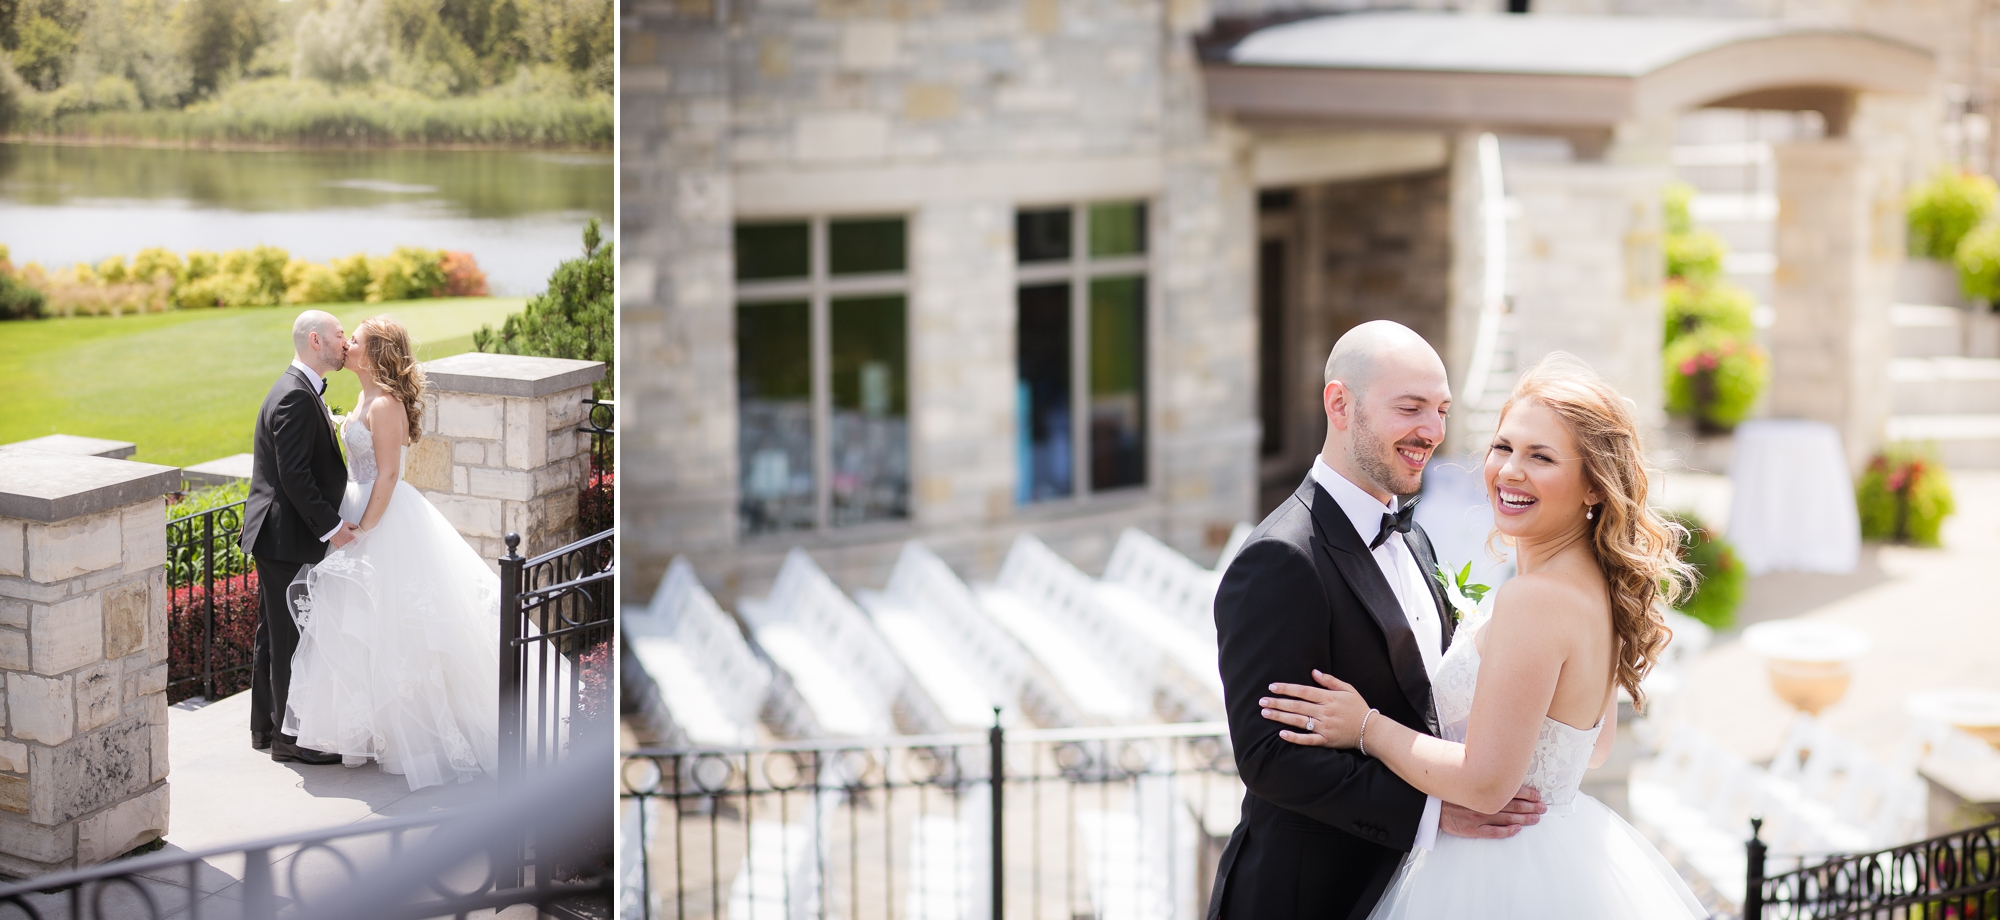 Toronto Wedding at Eagles Nest. Bride and groom share a kiss on the patio overlooking the pond